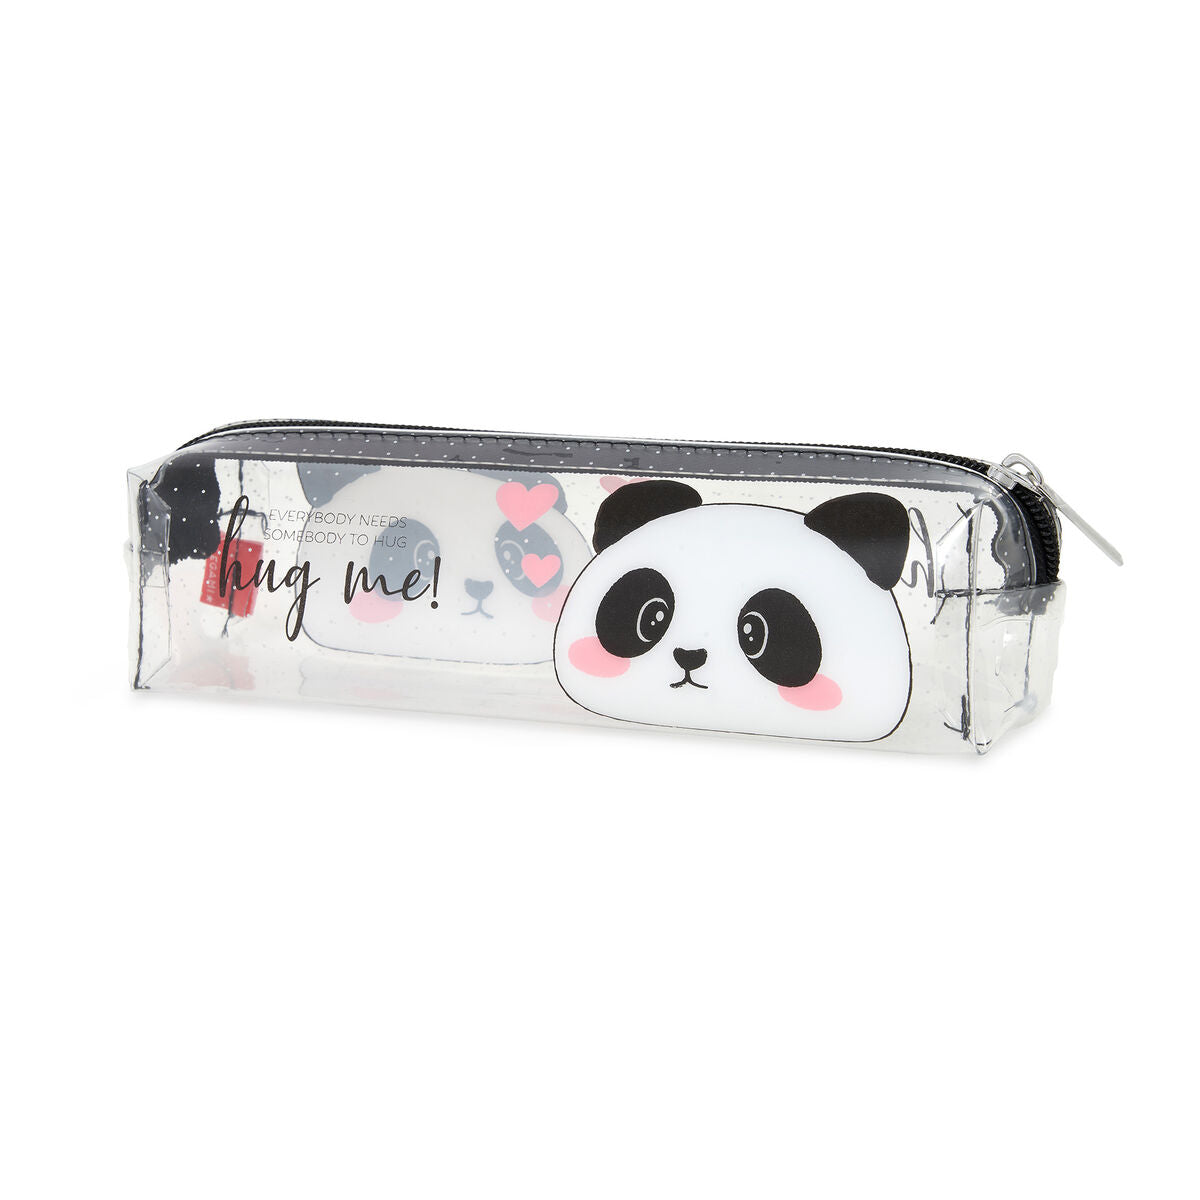 Back to School | Legami Transparent Pencil Case Panda by Weirs of Baggot St